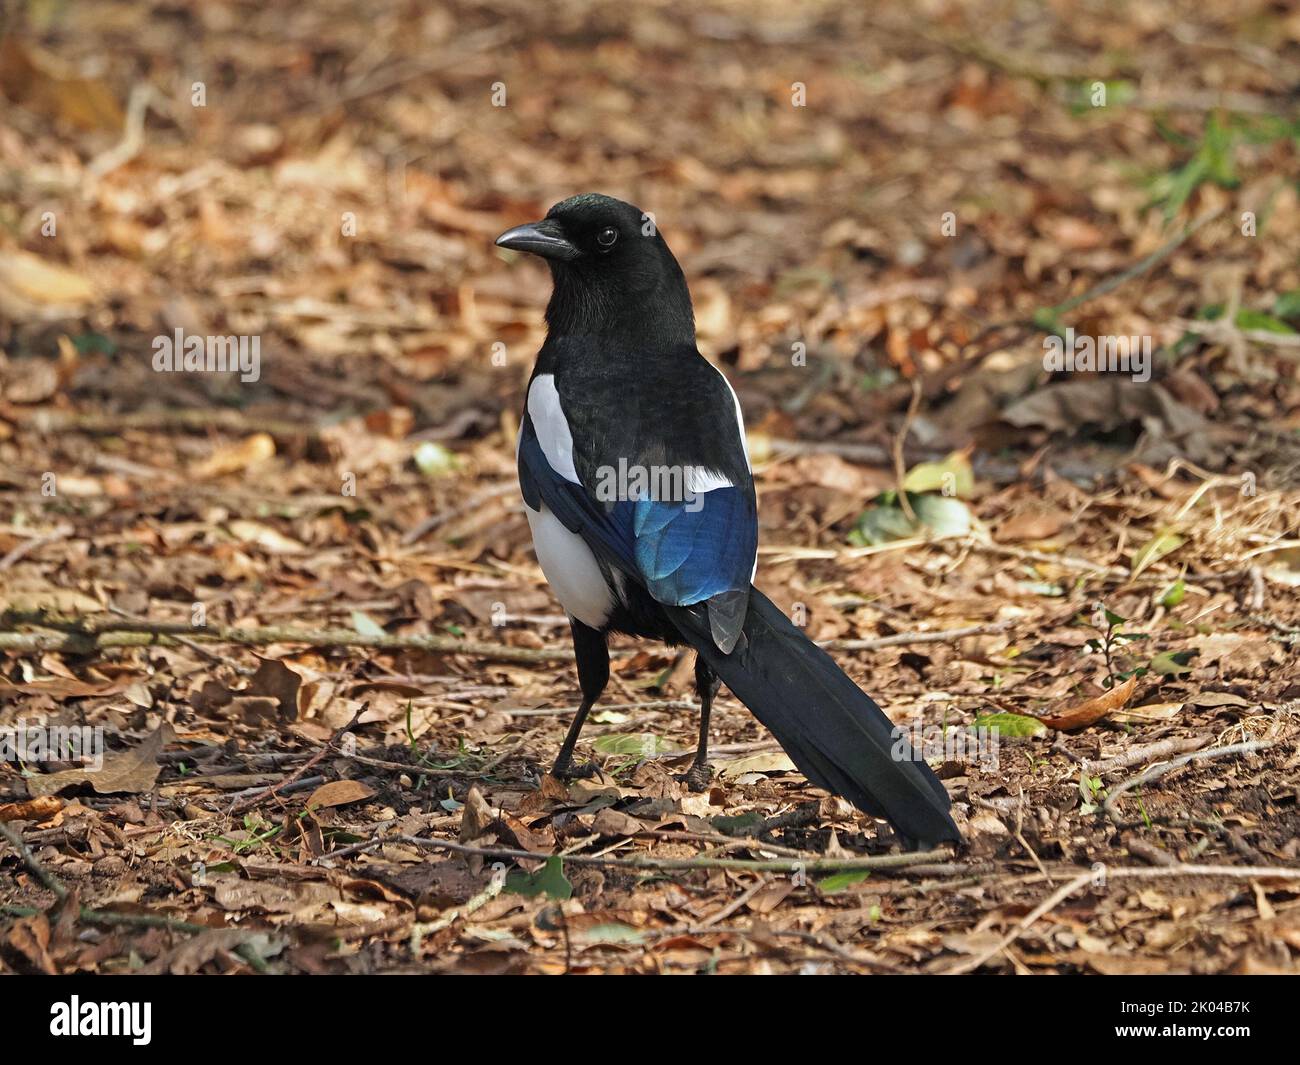 Eurasian magpie or common magpie (pica pica) with iridescent plumage & long balancing tail foraging in leaf litter London,England UK Stock Photo